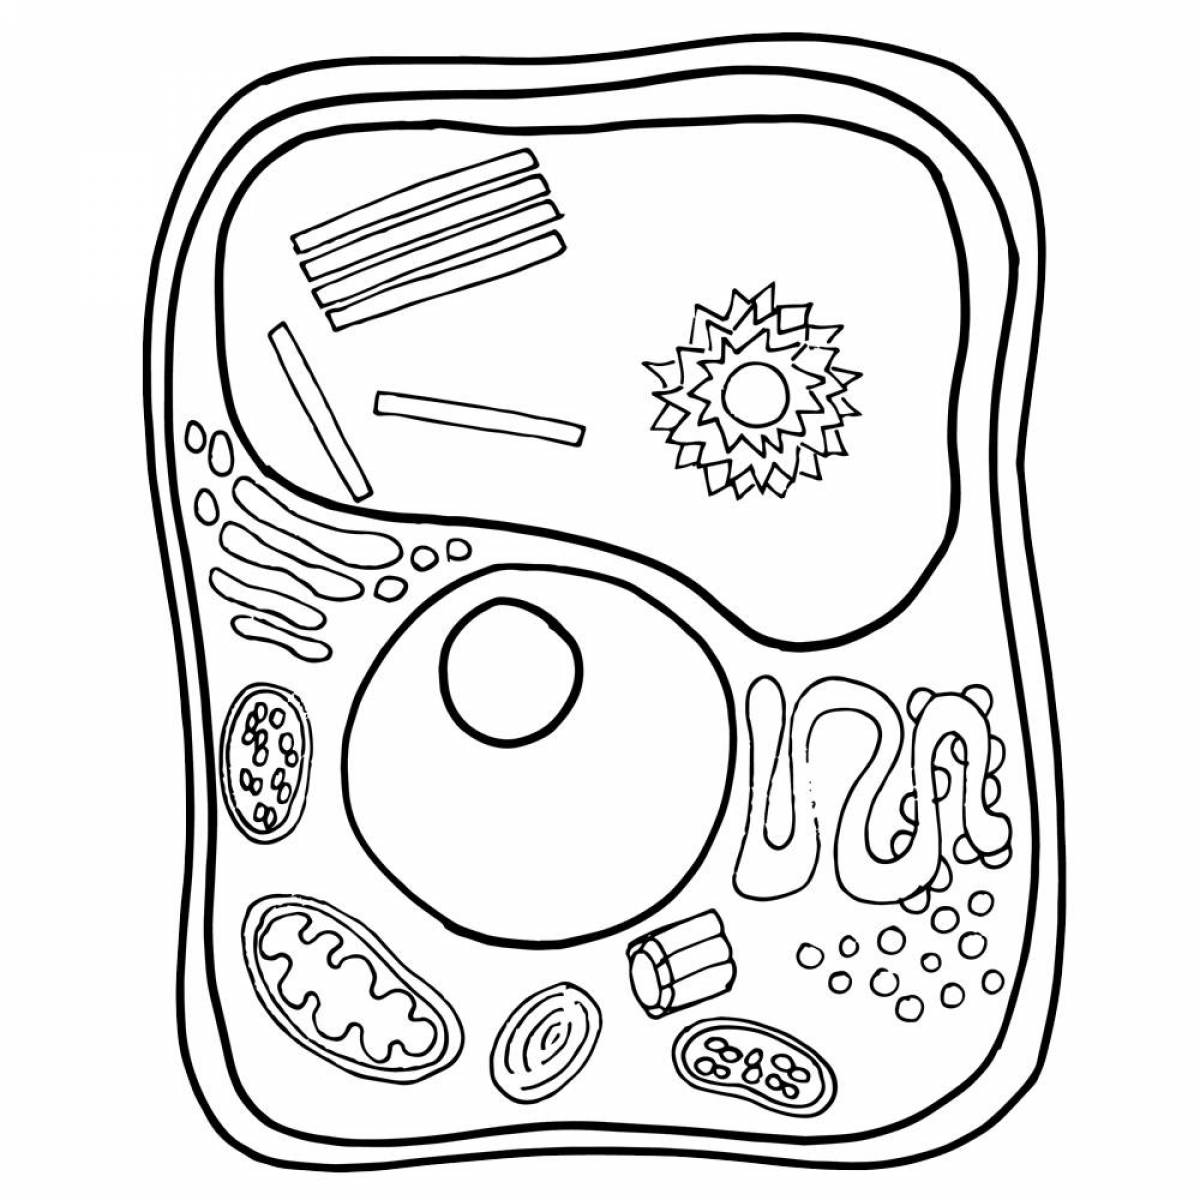 Animal cell